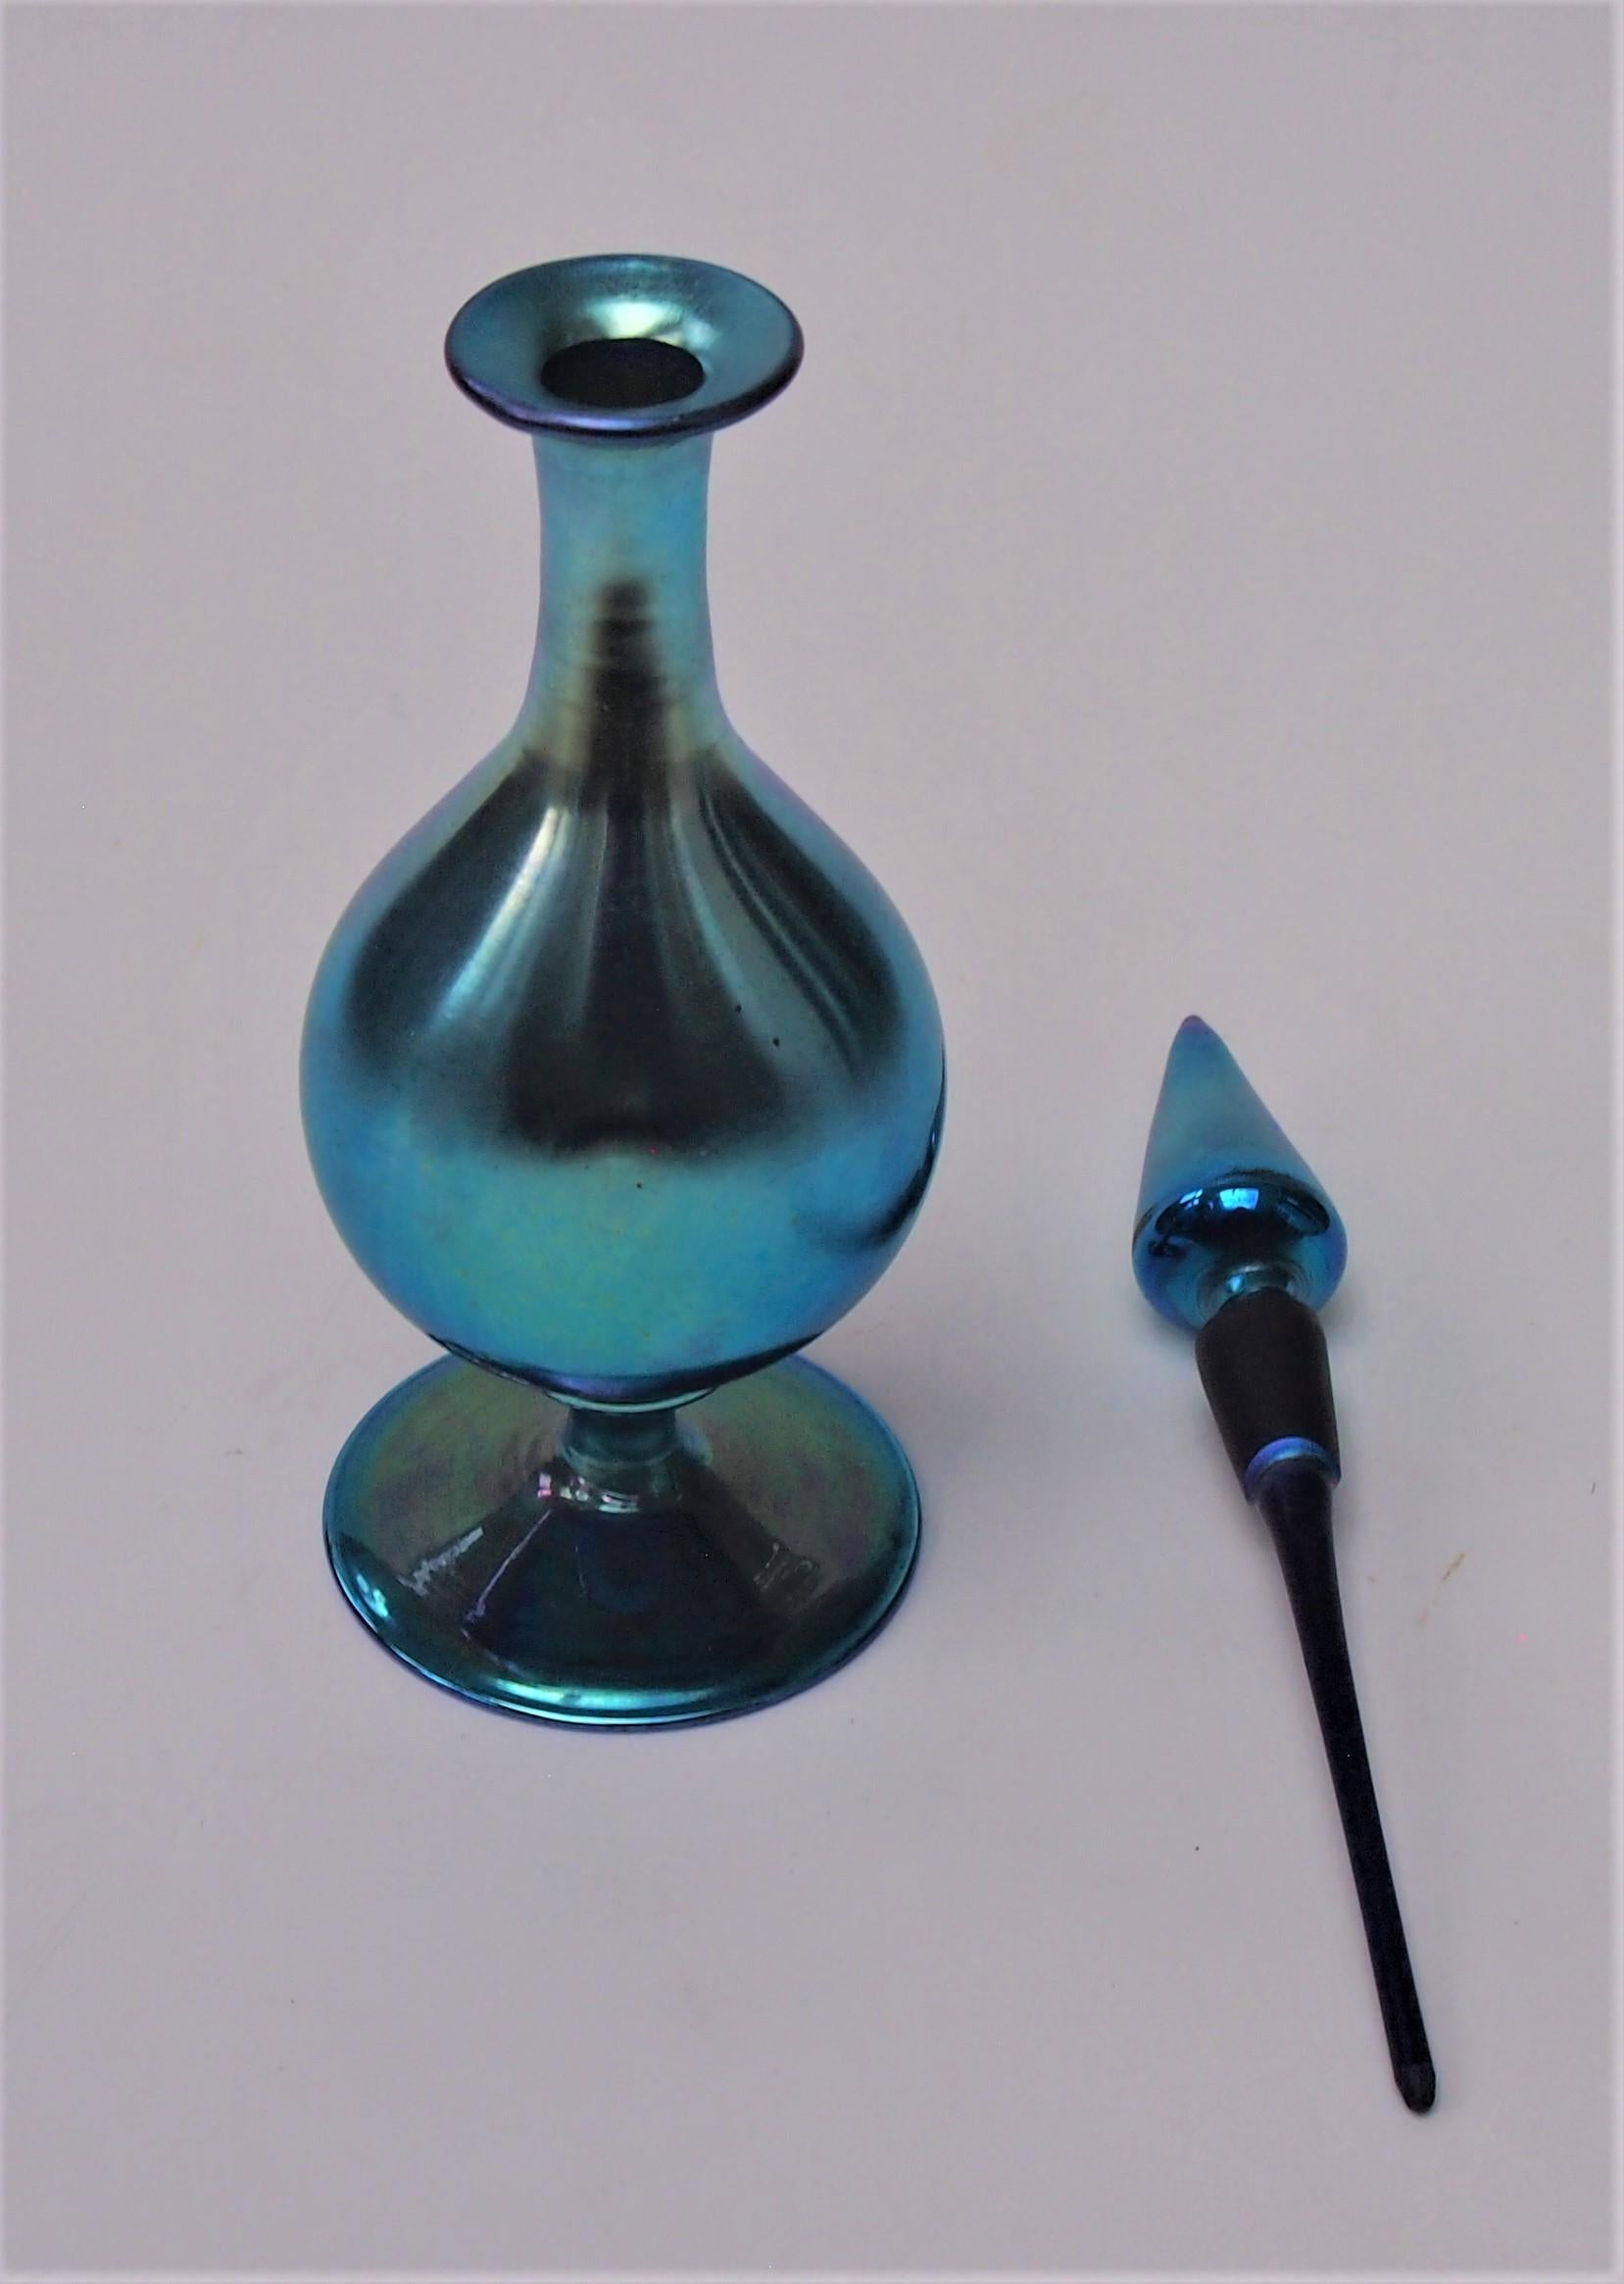 Amazing fully signed blue aurene Steuben long stopper scent bottle by Frederick Carder c1915 signed Steuben Aurene with the shape code 3174. The blue aurene gives the bottle a fabulous high finish blue mirror like iridescence.  The scent bottle has